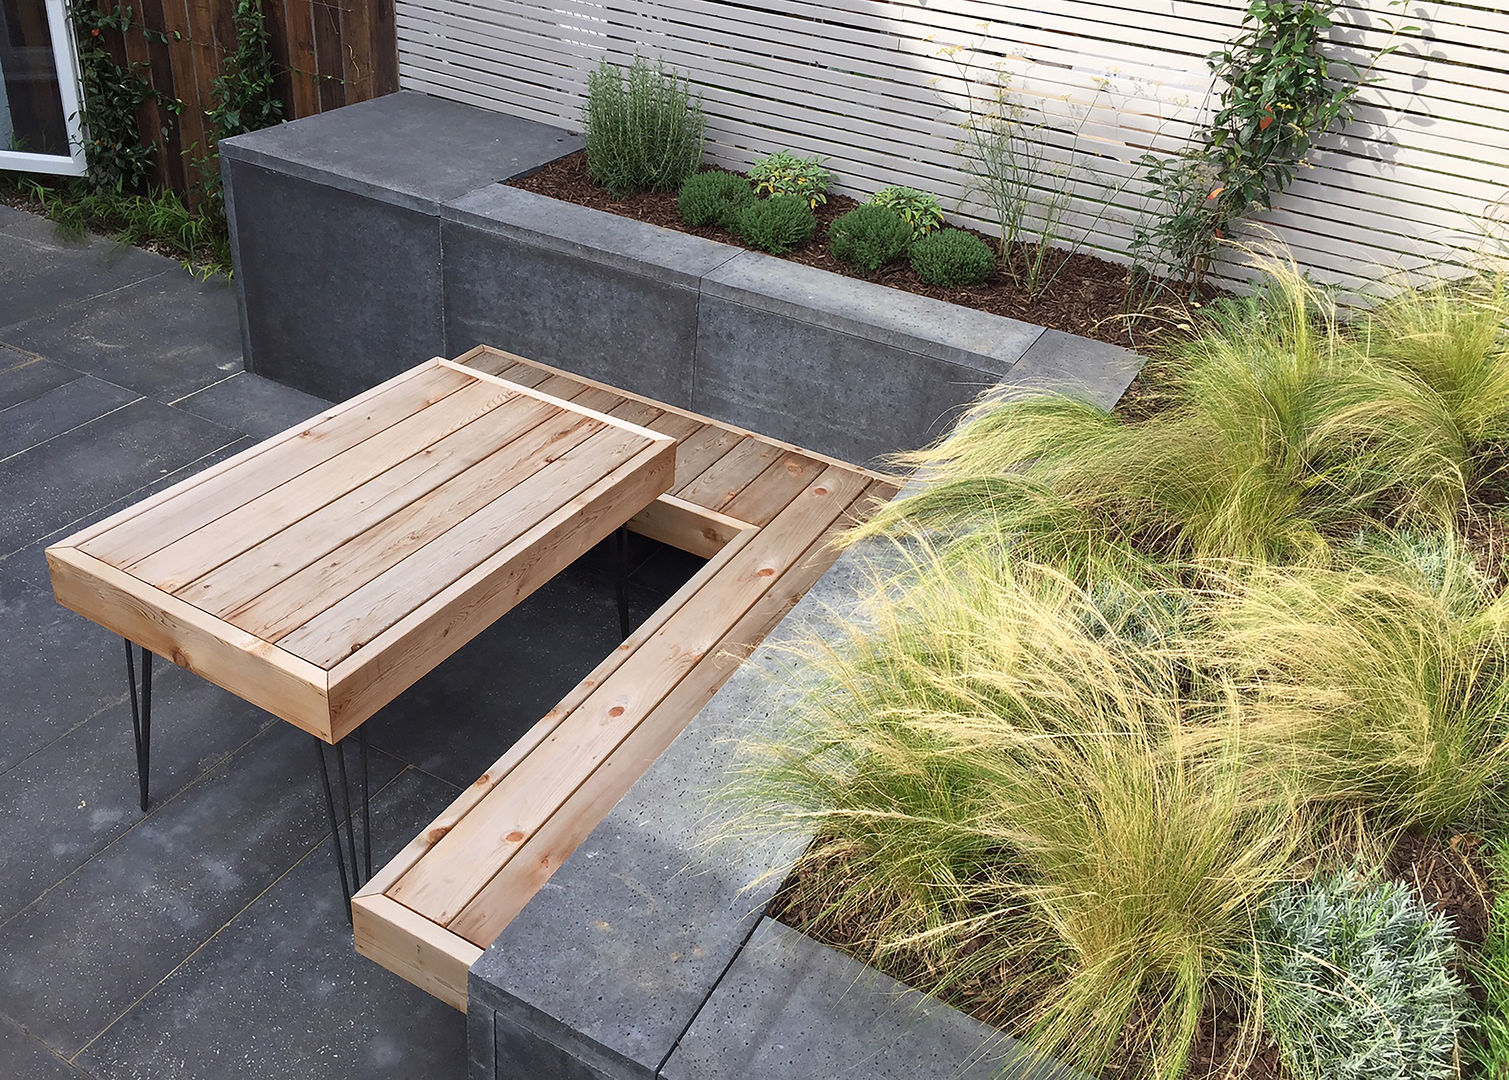 Bespoke Western Red Cedar hairpin leg table and built in floating bench Tom Massey Landscape & Garden Design Сад